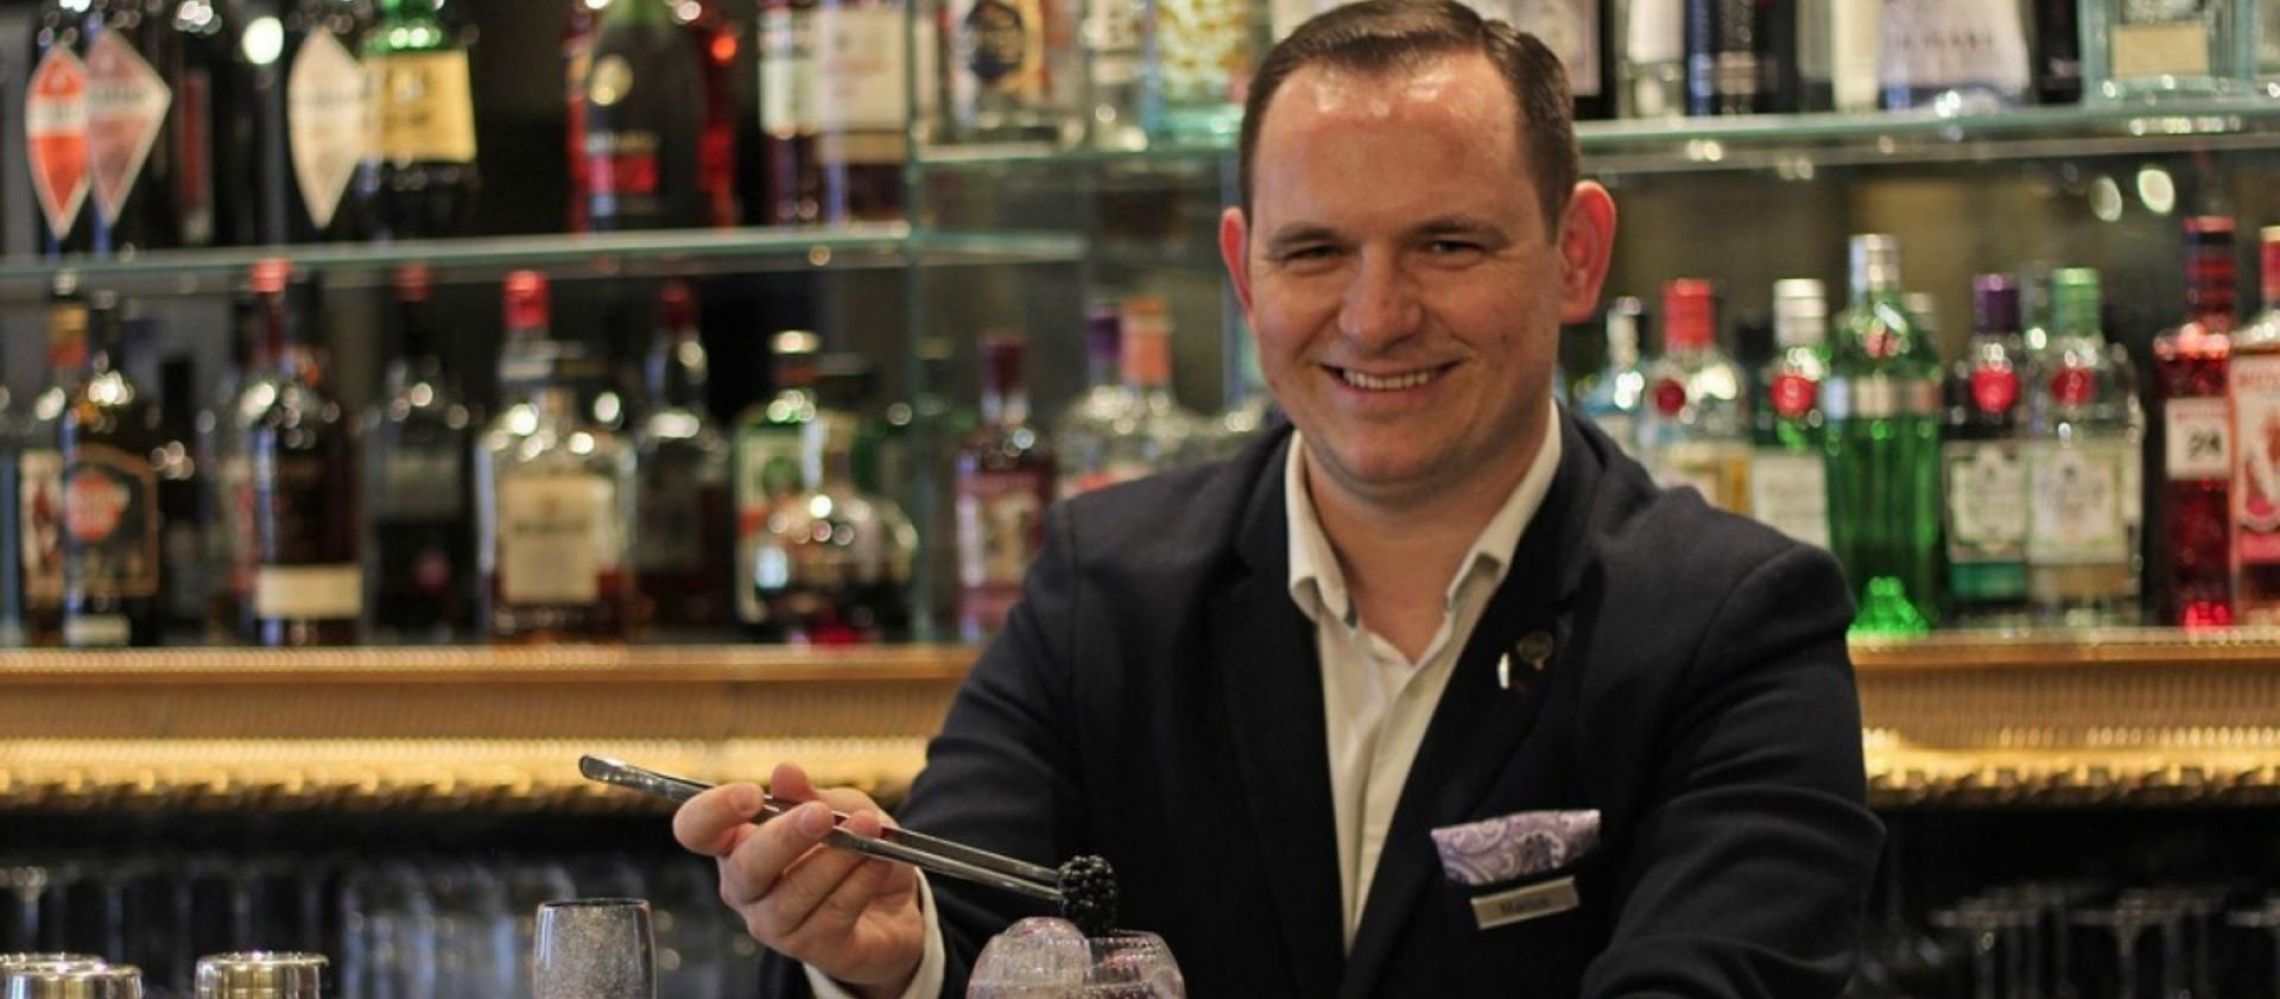 Photo for: Know Your Bartenders: Marius Bitegye-Pop, Bars Manager at Strand Palace Hotel